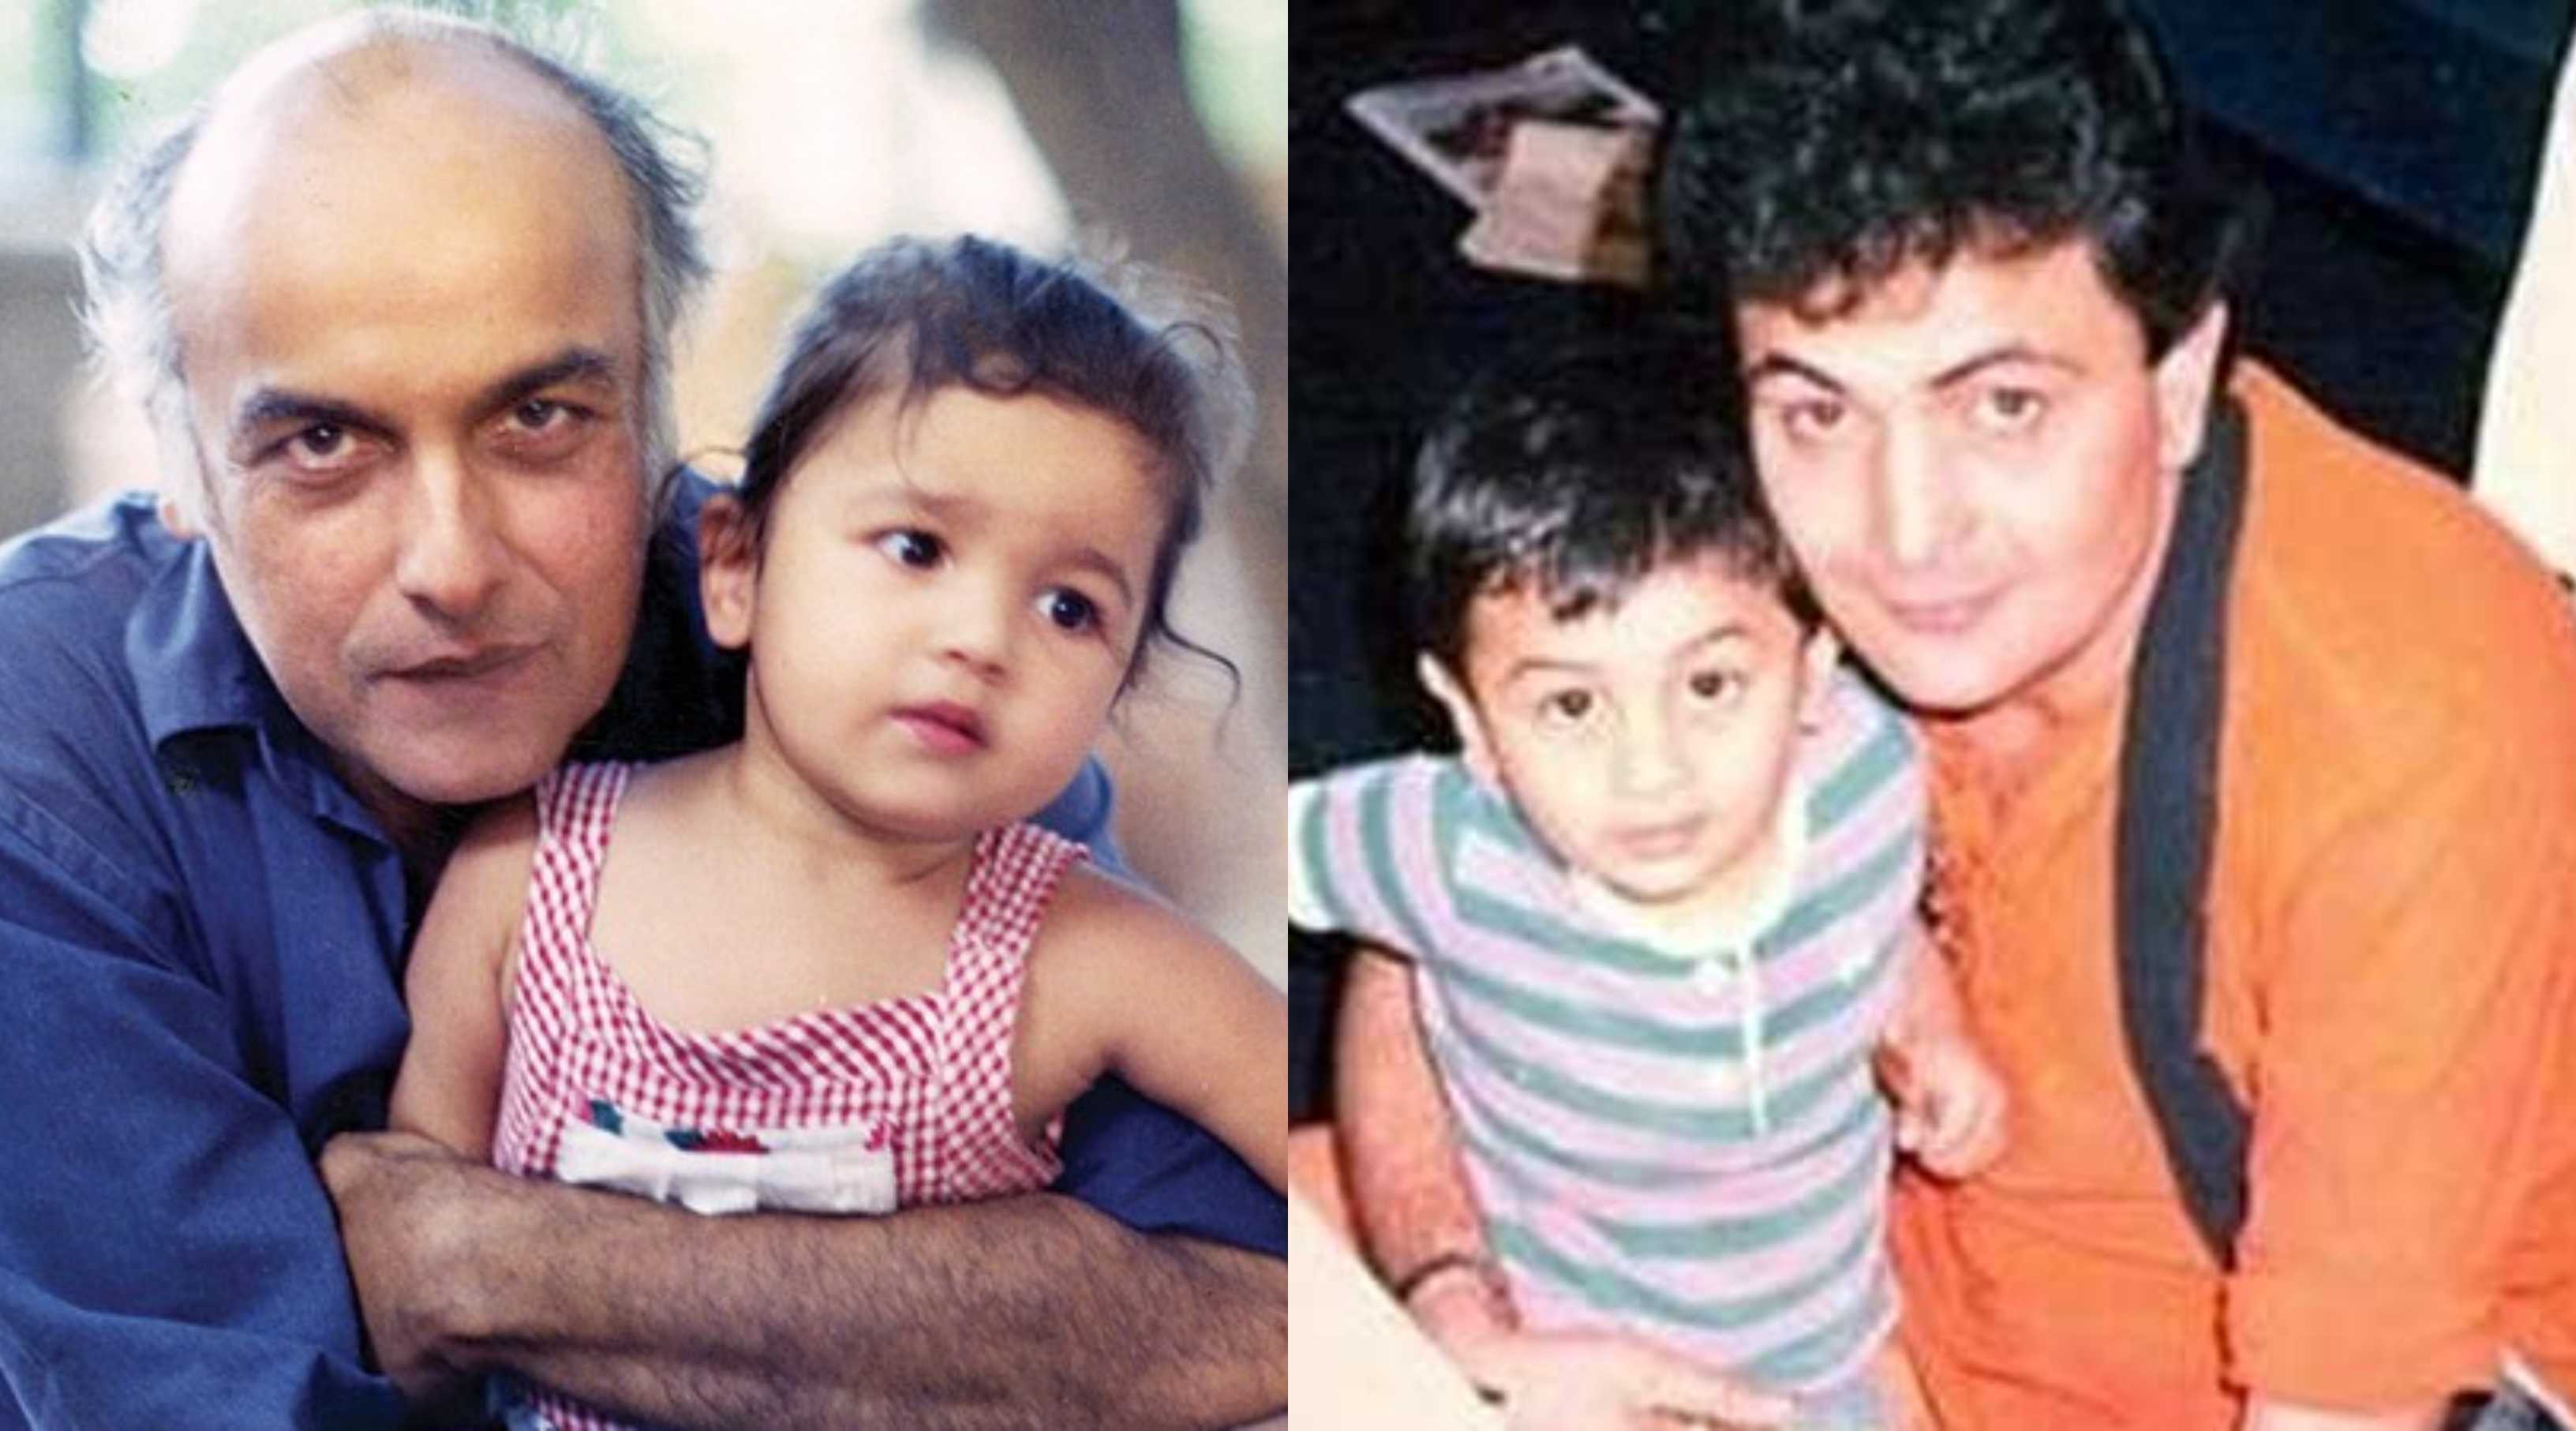 As Alia Bhatt and Ranbir Kapoor gear up for parenthood, here’s a look at some of their cutest childhood snaps